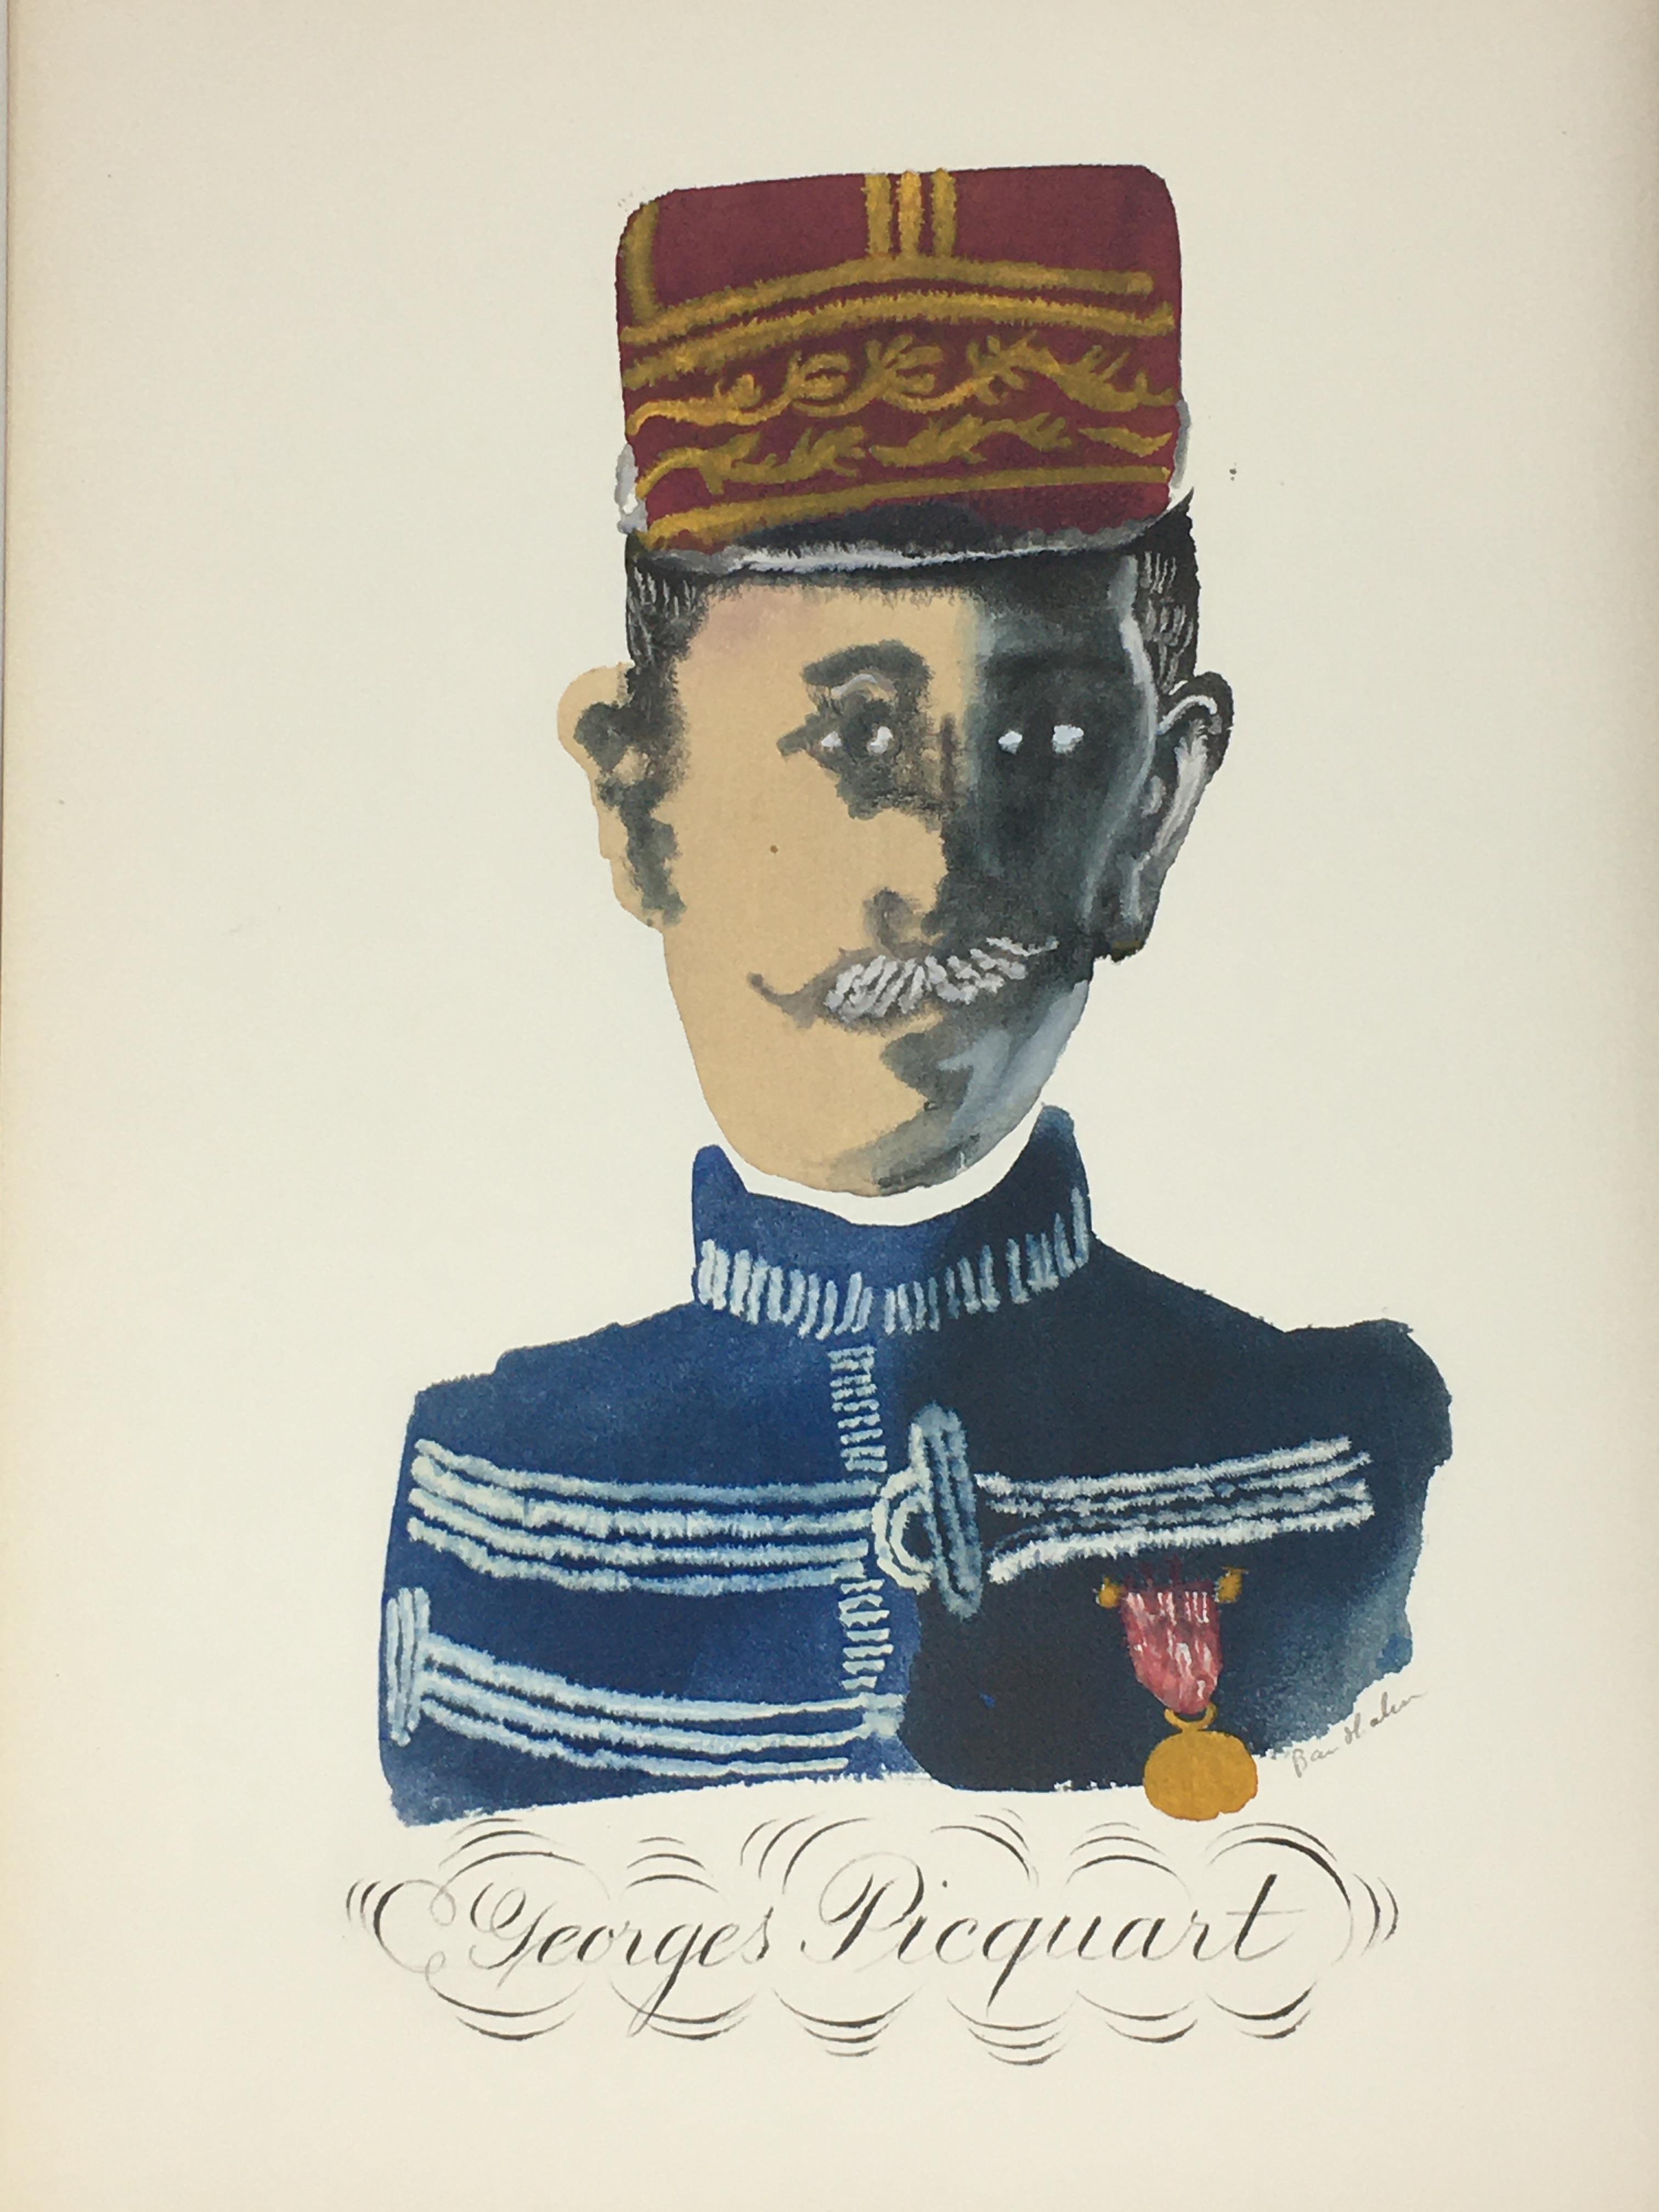 Dreyfus Affair - Book Collection featuring The Ben Shahn Prints (Limited First Edition) - Image 22 of 73